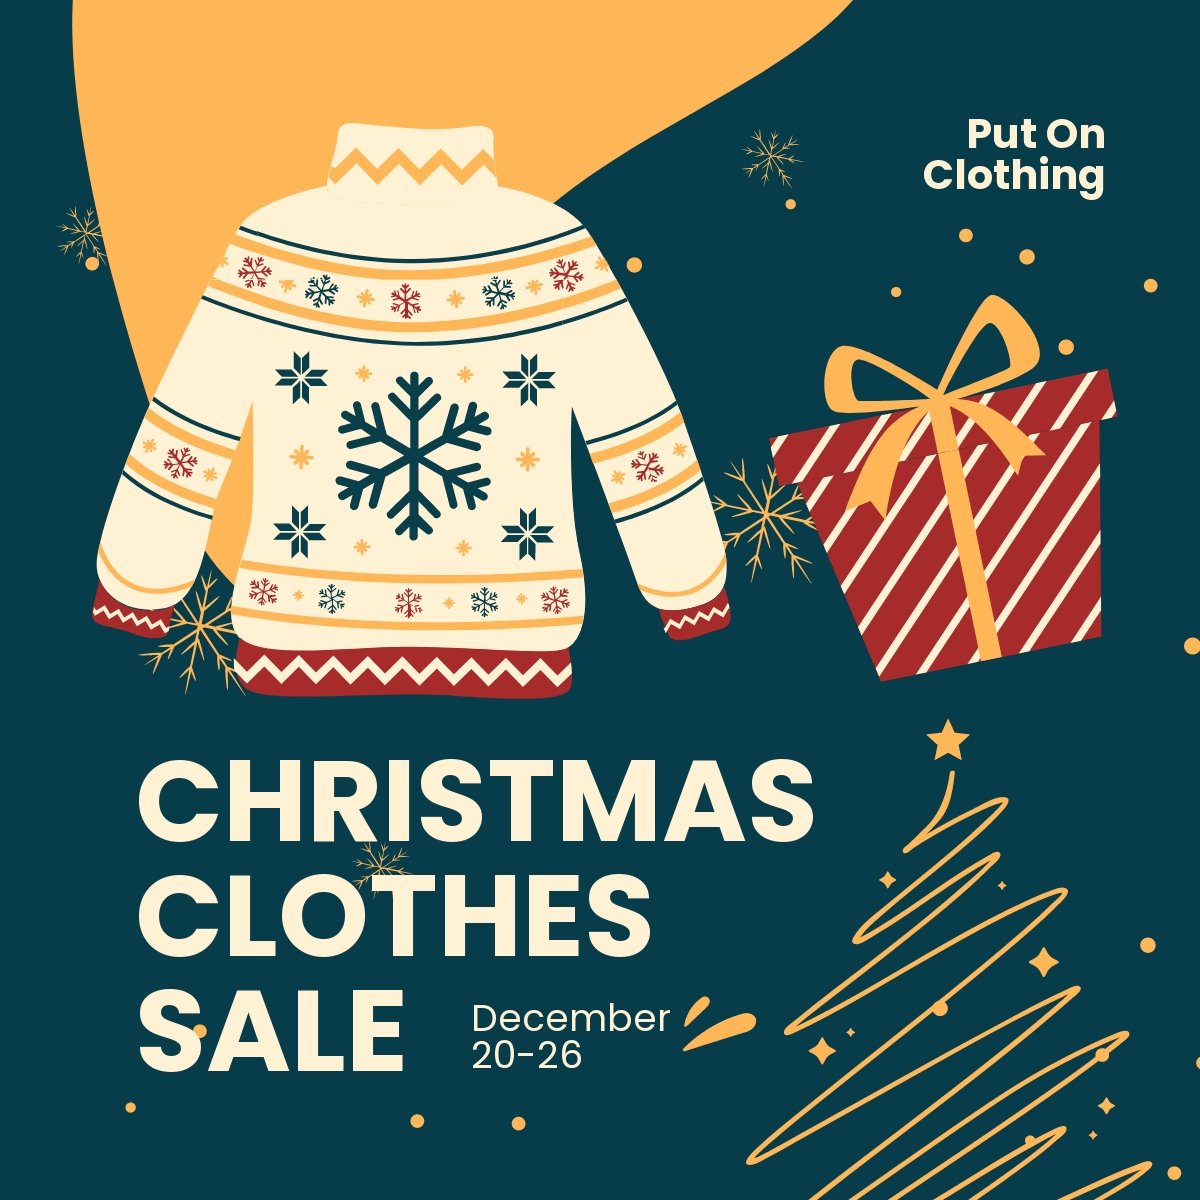 Free Christmas Clothes Sale LinkedIn Post Template